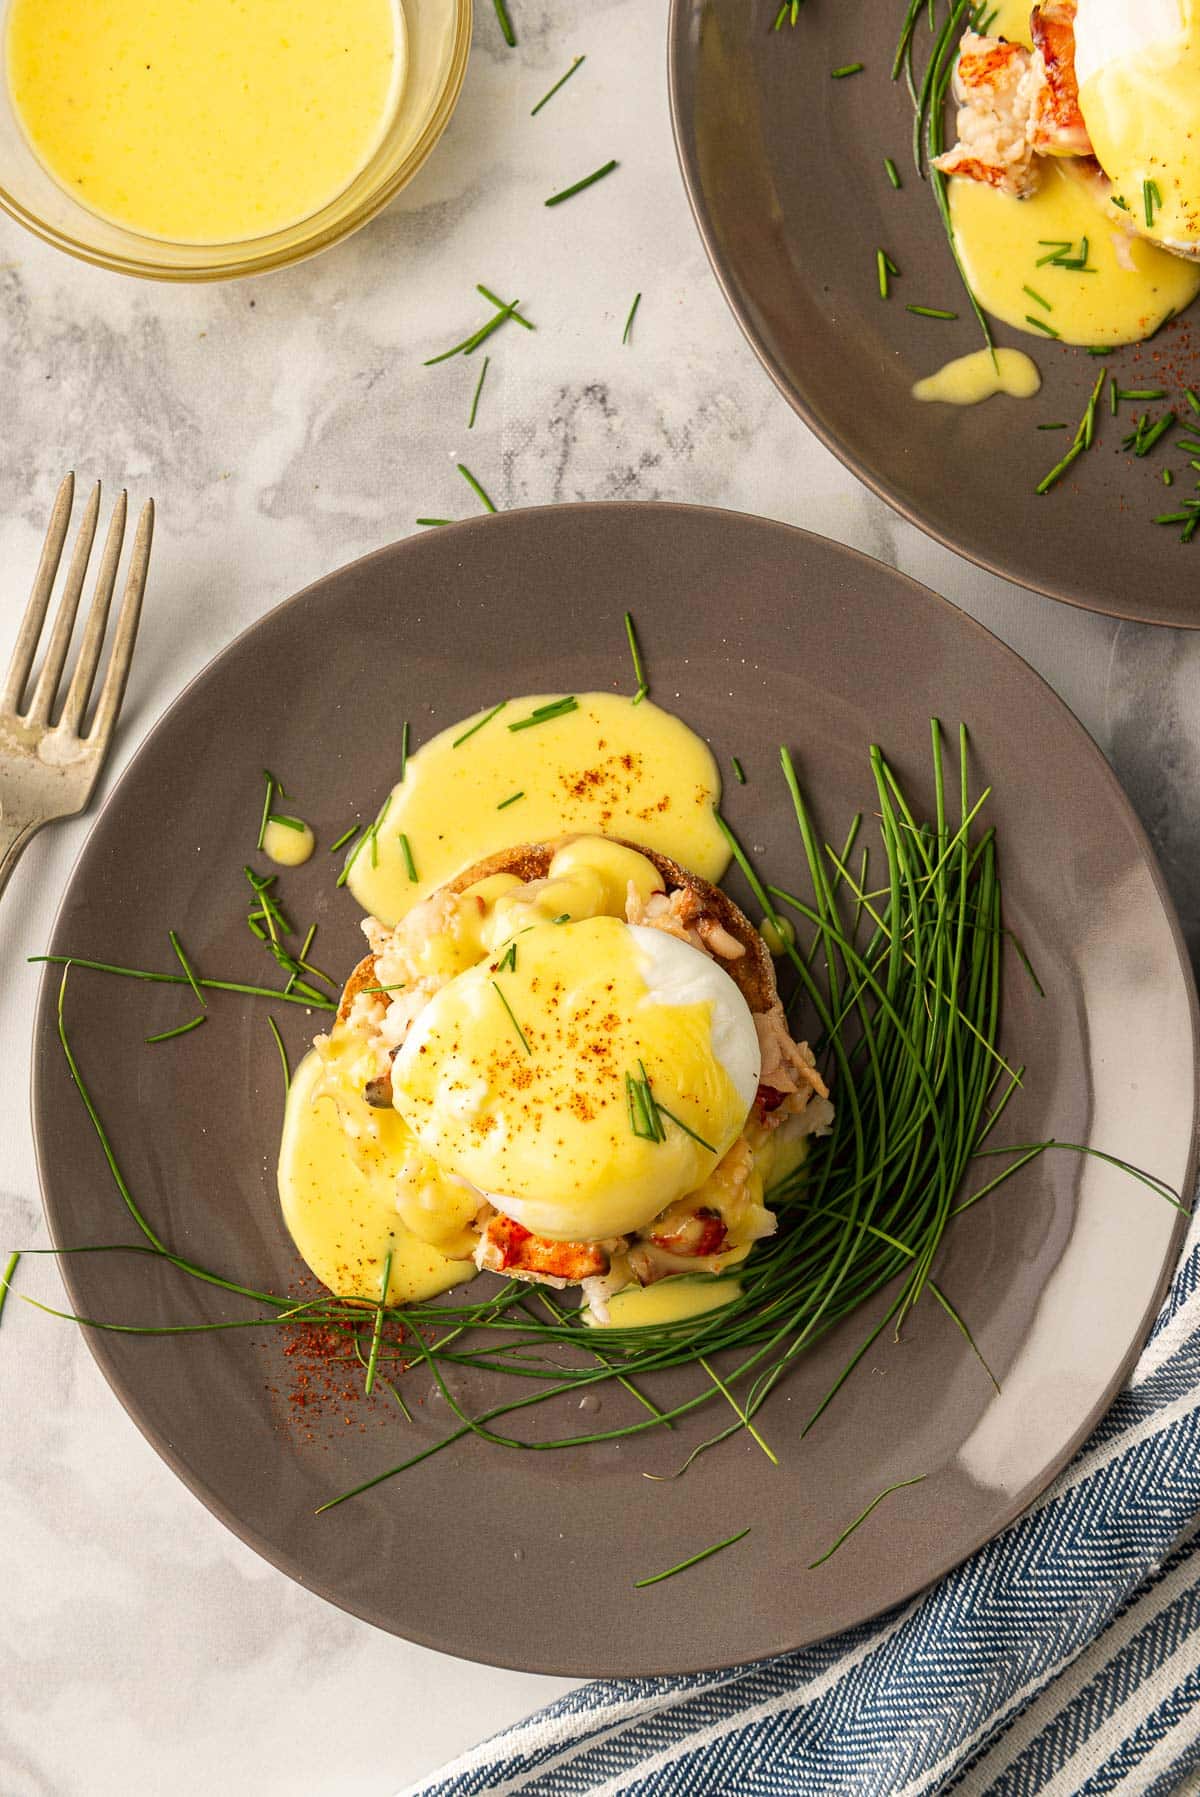 Lobster eggs benedict on a dark plate with hollandaise on top.